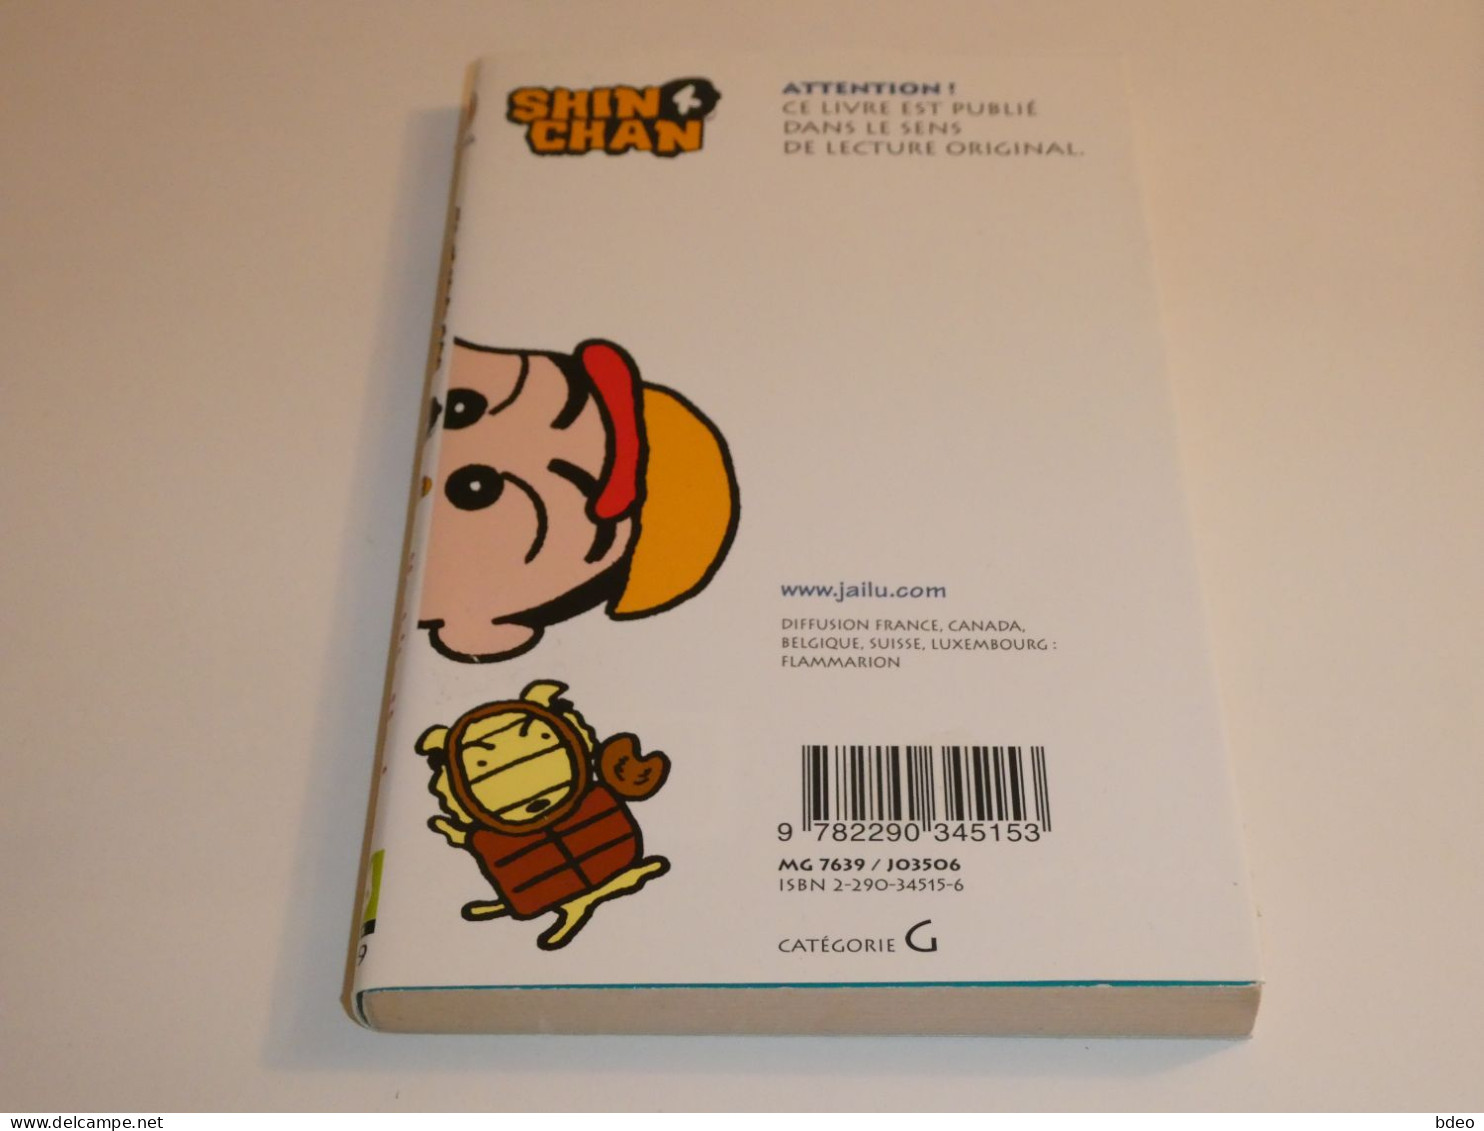 SHINCHAN TOME 4/ 1ERE SERIE / BE - Mangas Versione Francese